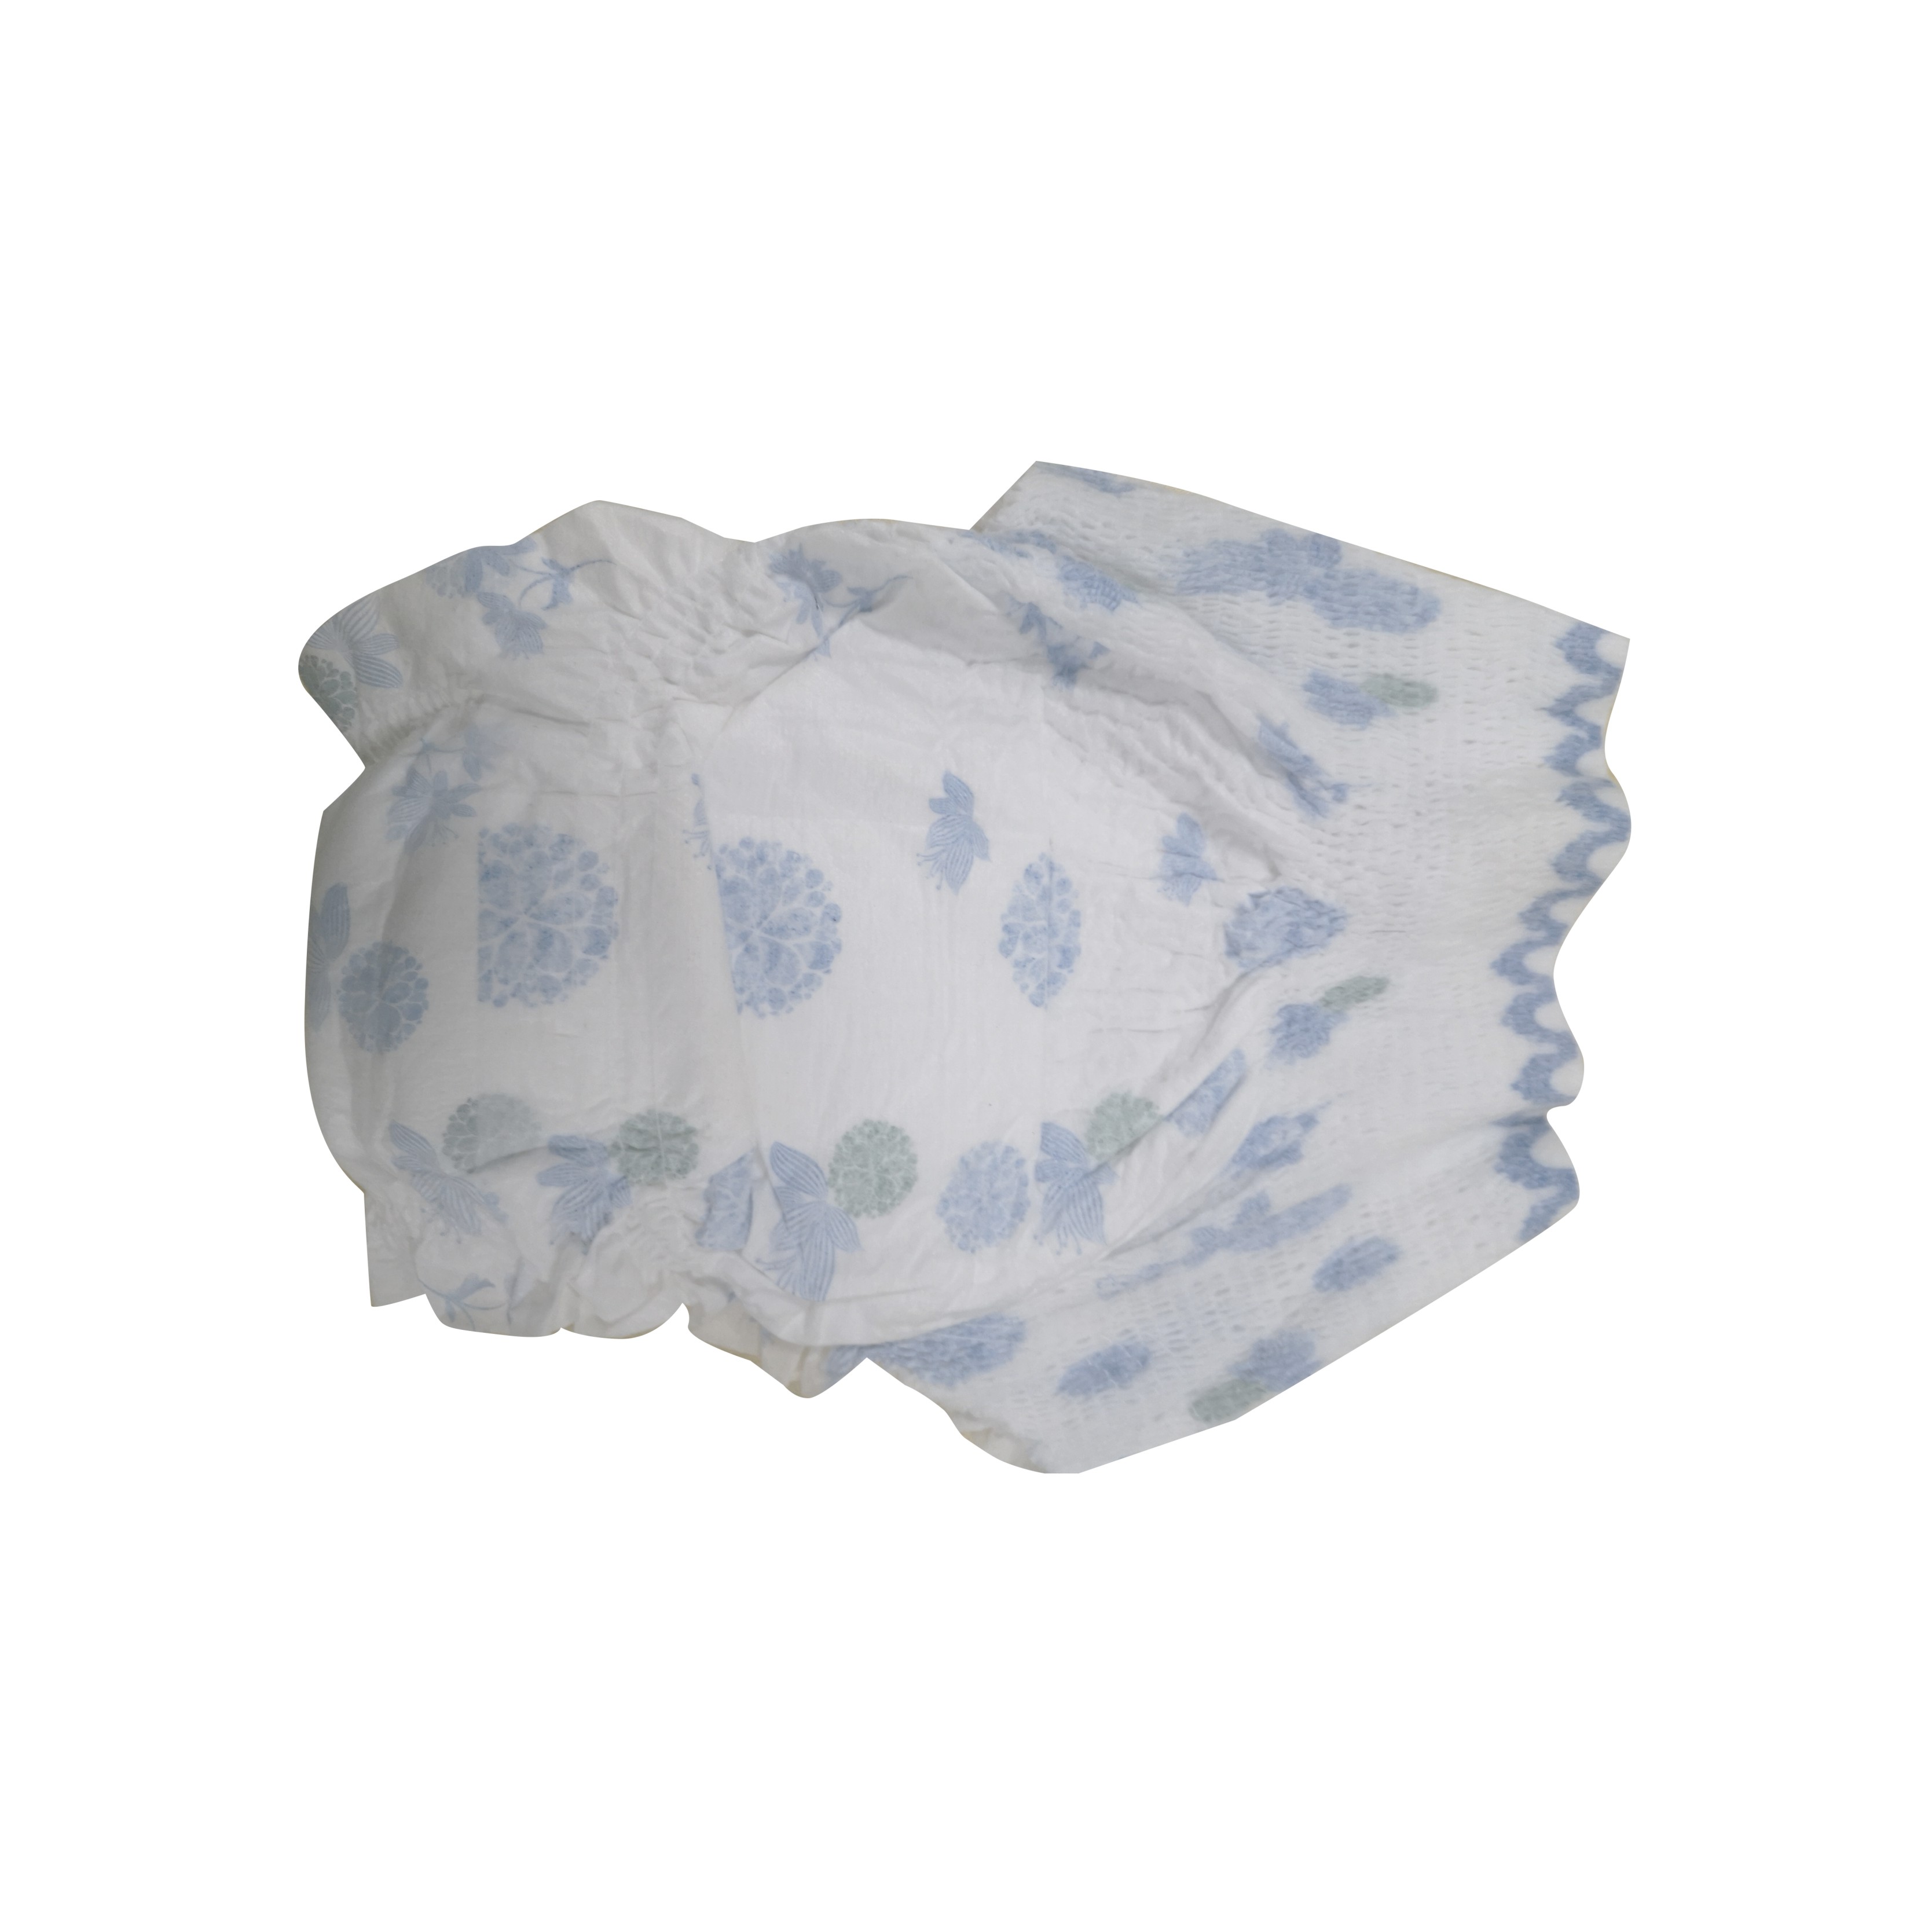 Fluff Pulp Material and Plain Woven Feature ABDL Comfy Adult Diaper